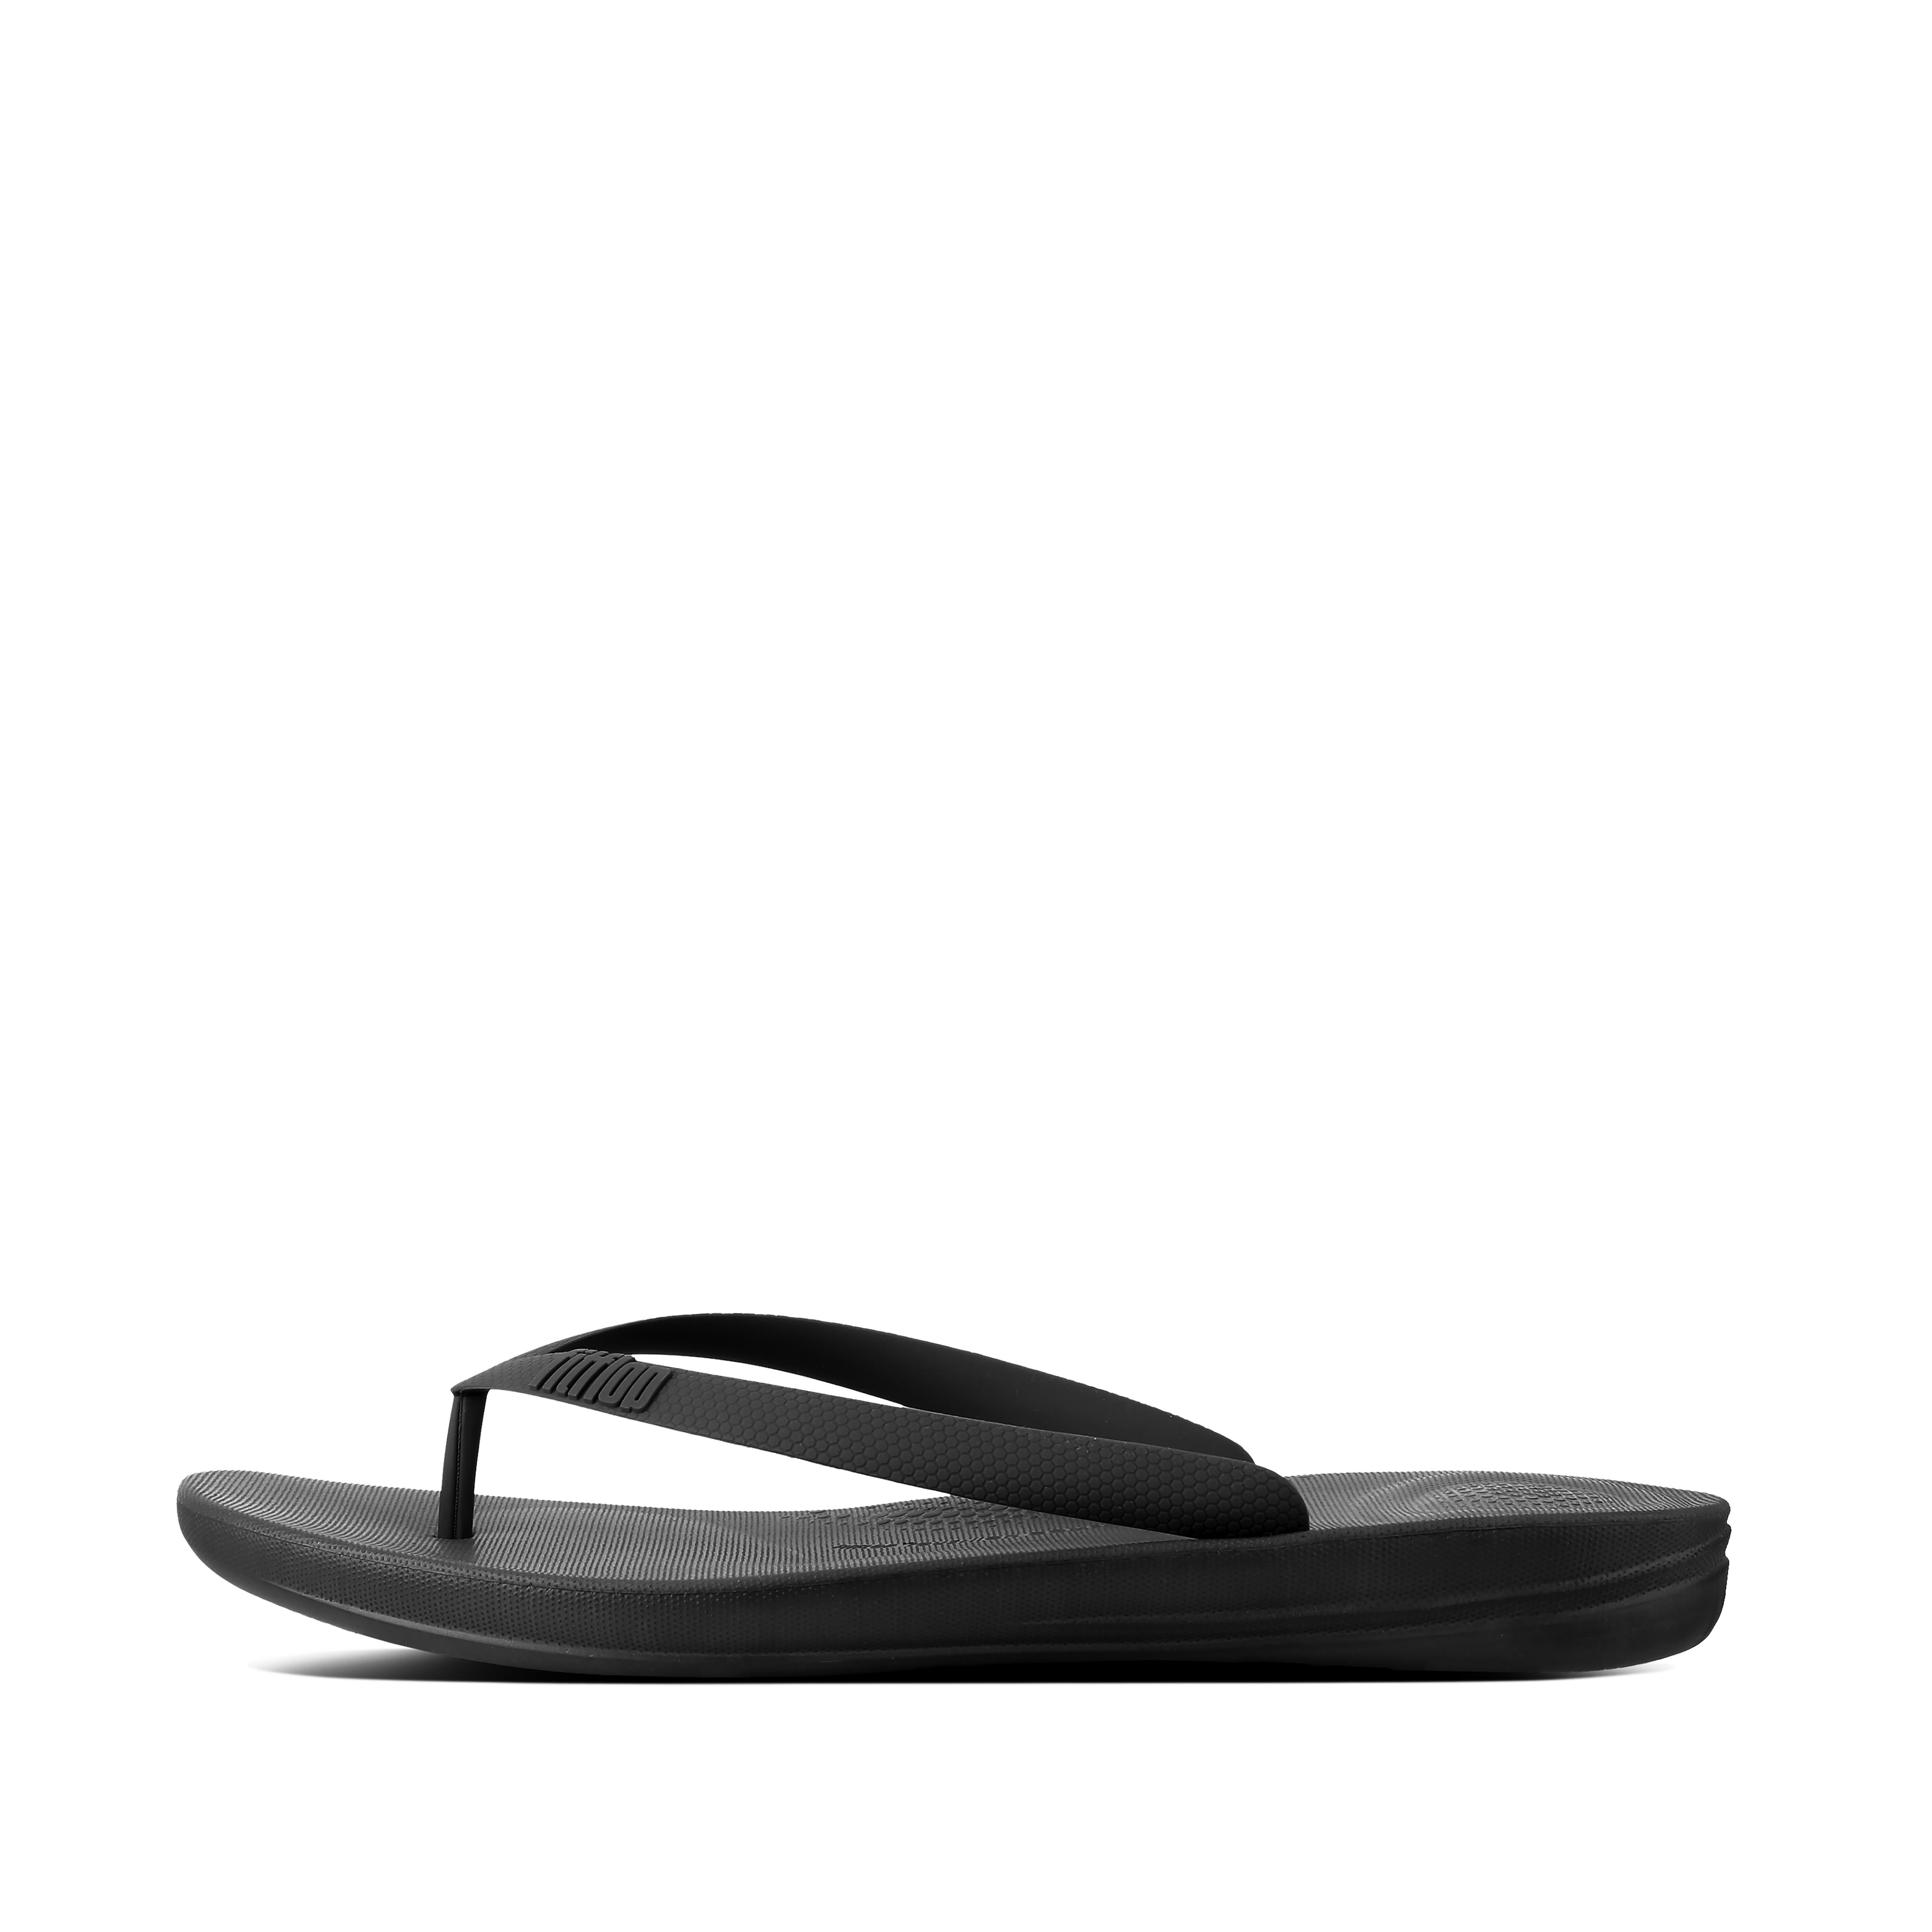 Fitflop Rubber Iqushion Ergonomic Flip-flops Beach & Pool Shoes in Black  for Men - Save 9% - Lyst